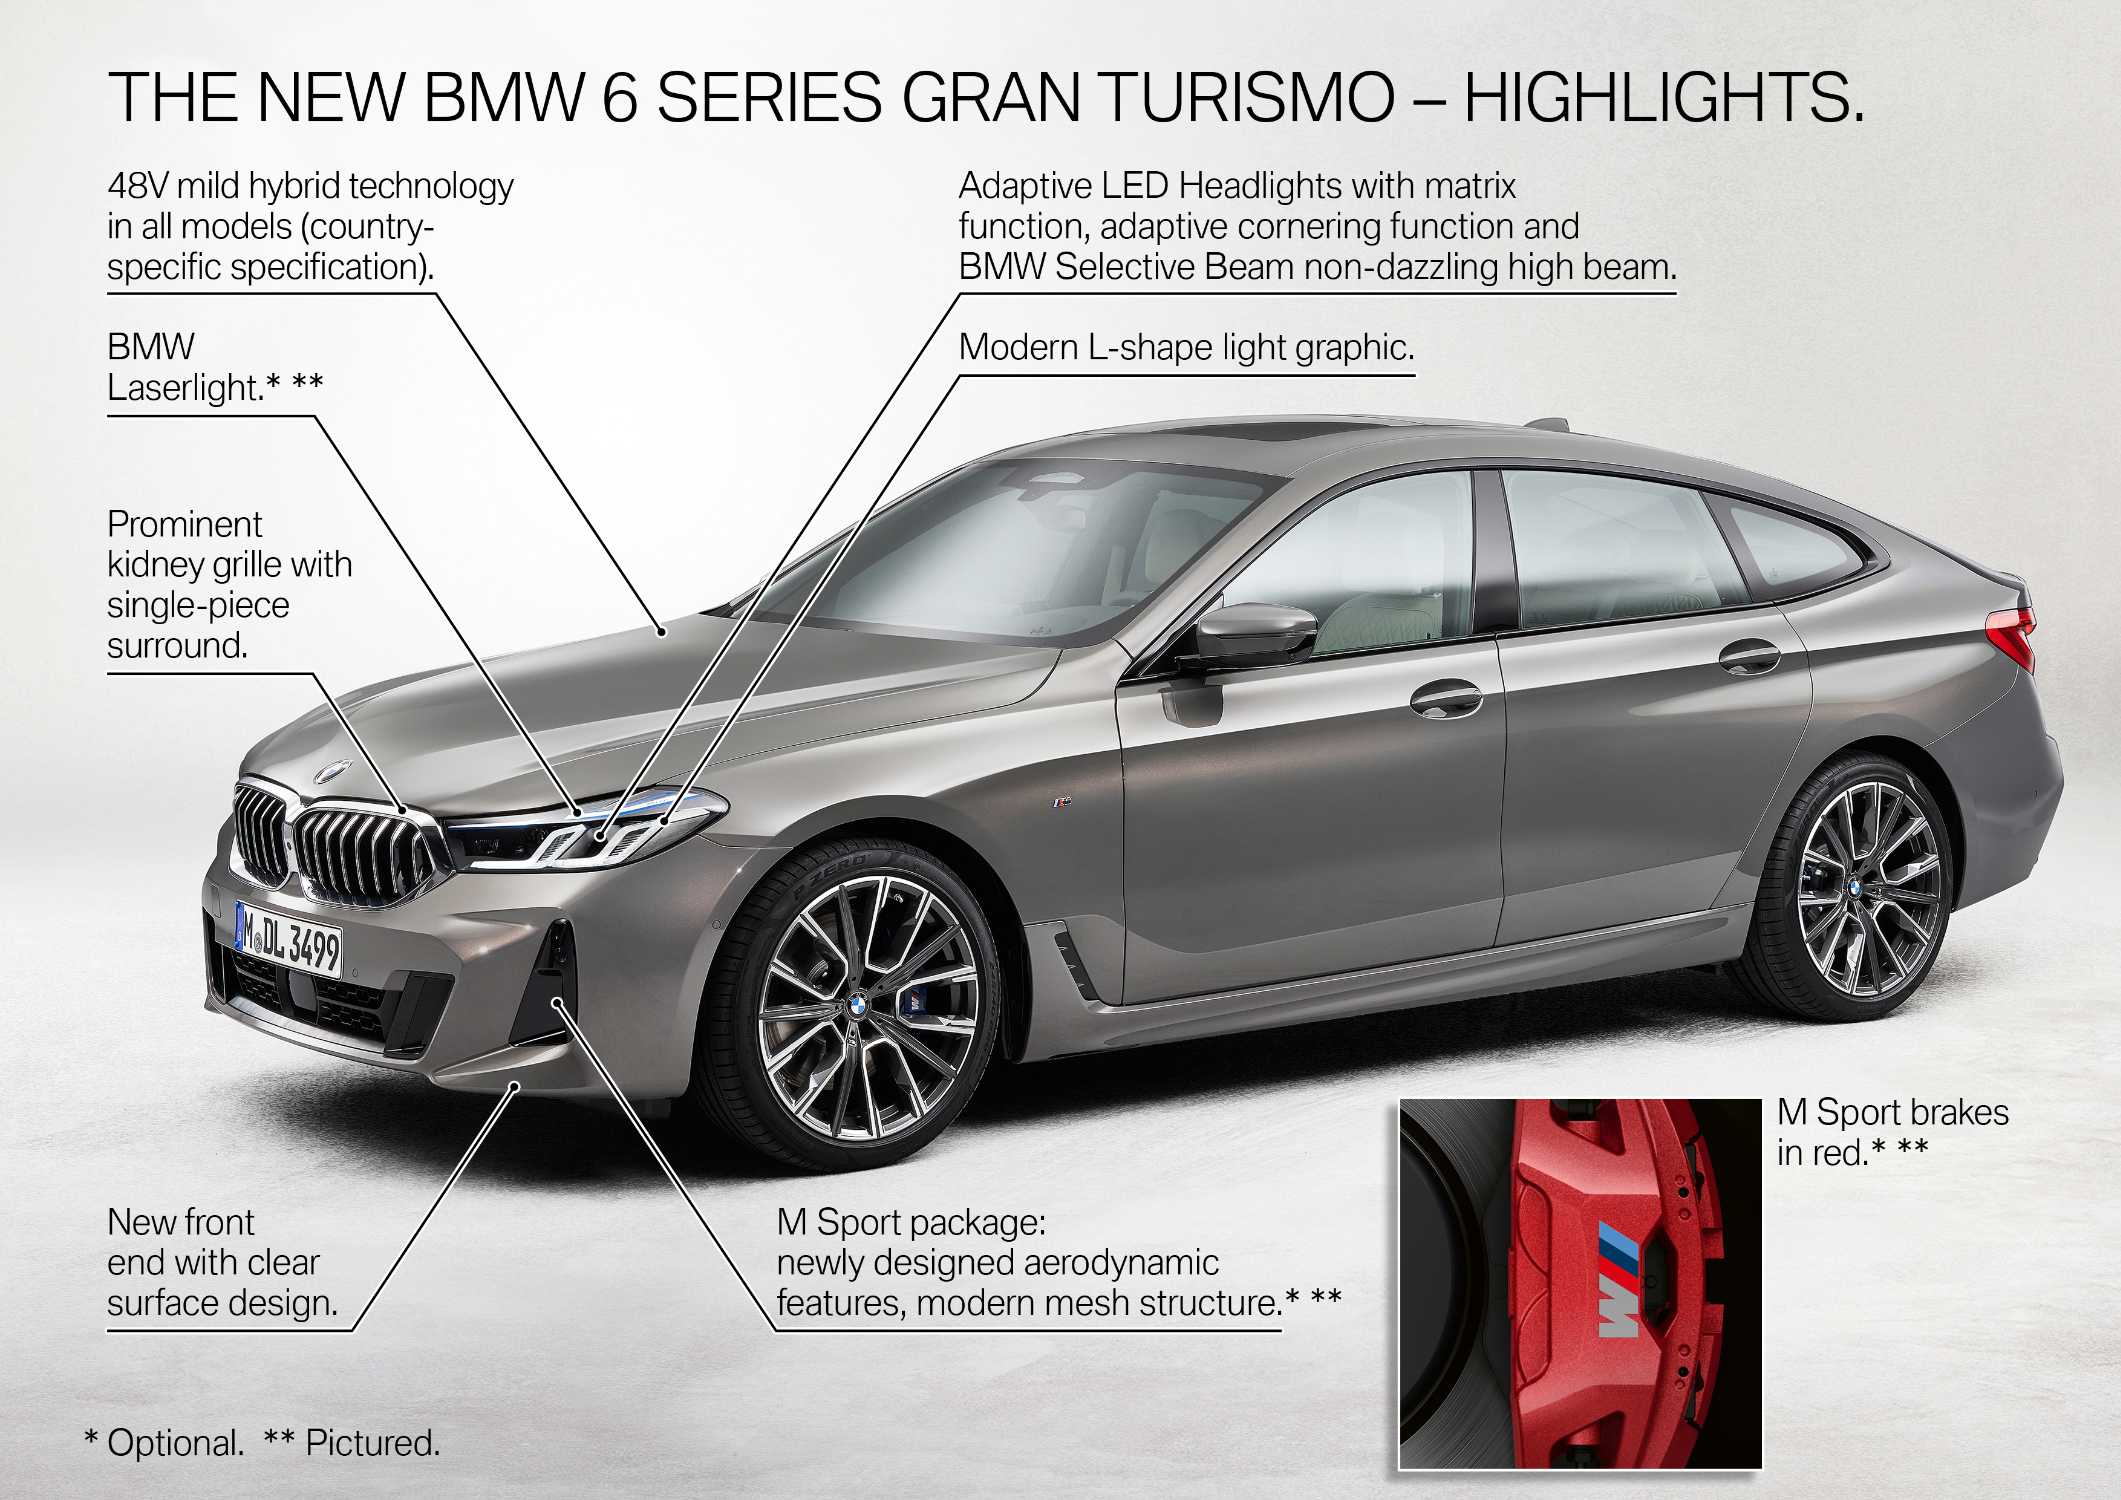 The new BMW 6 Series Gran Turismo - Highlights (05/2020).